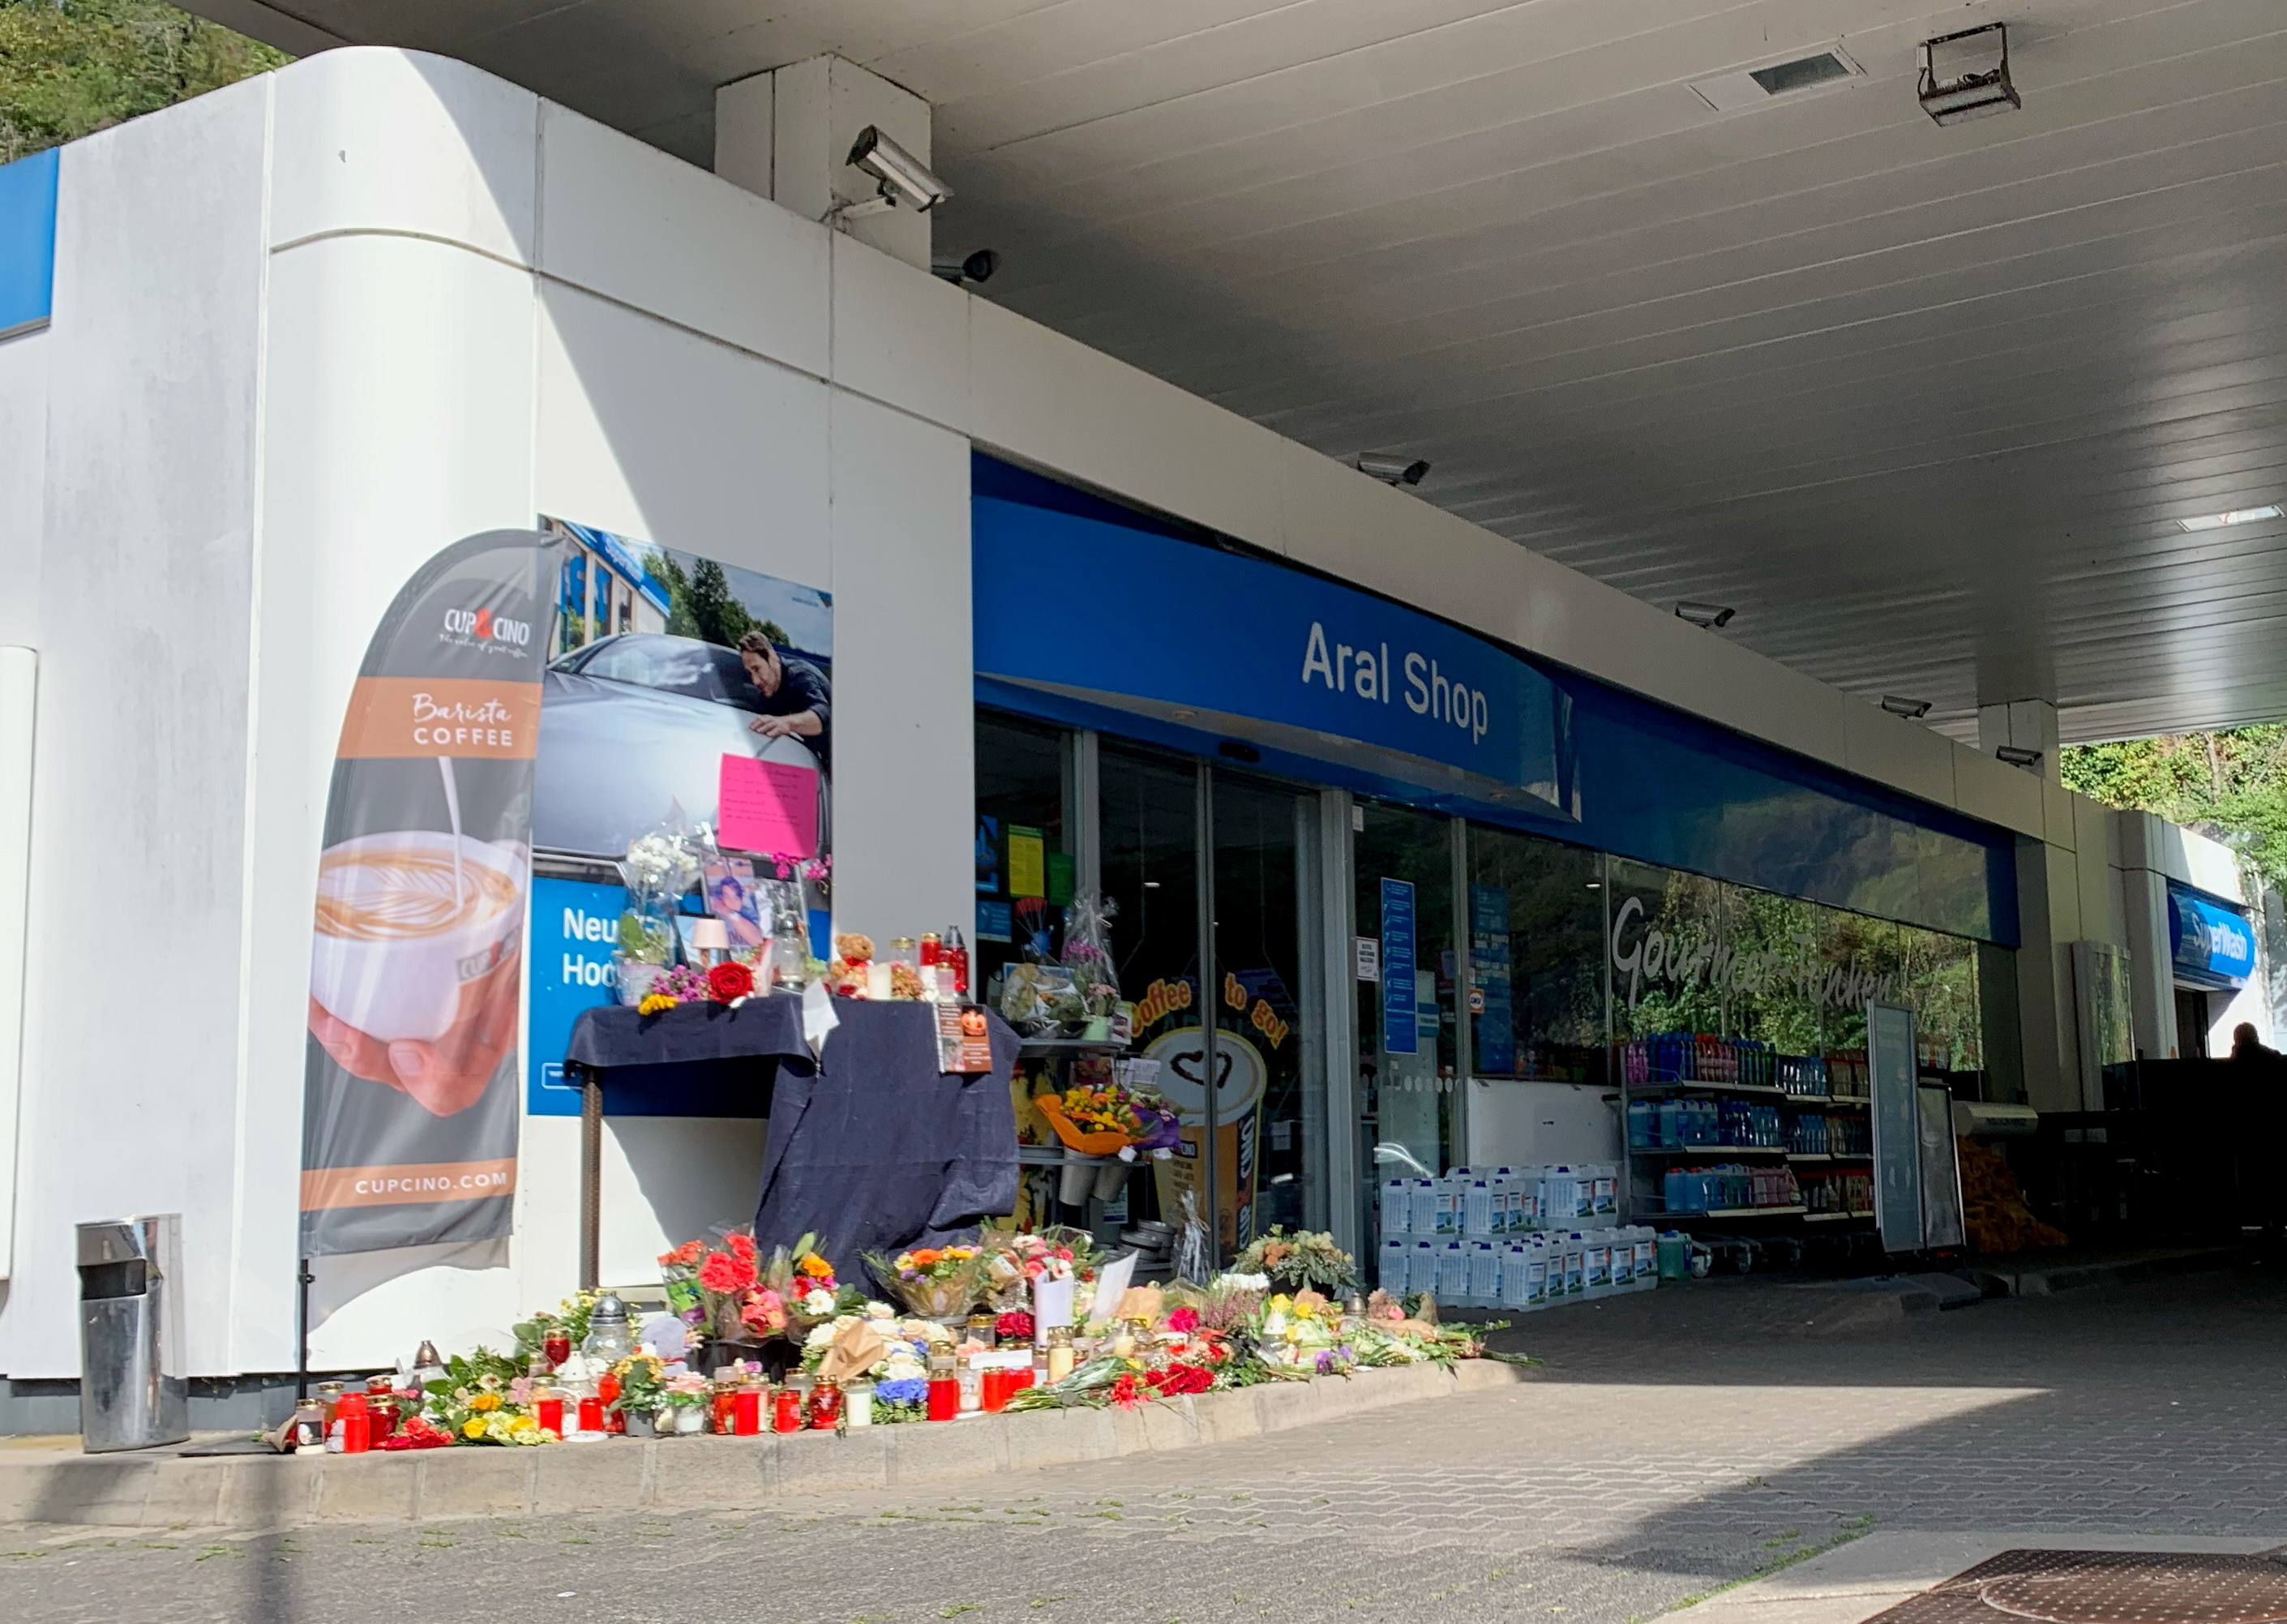 Flowers are placed in front of a gas station in Idar-Oberstein